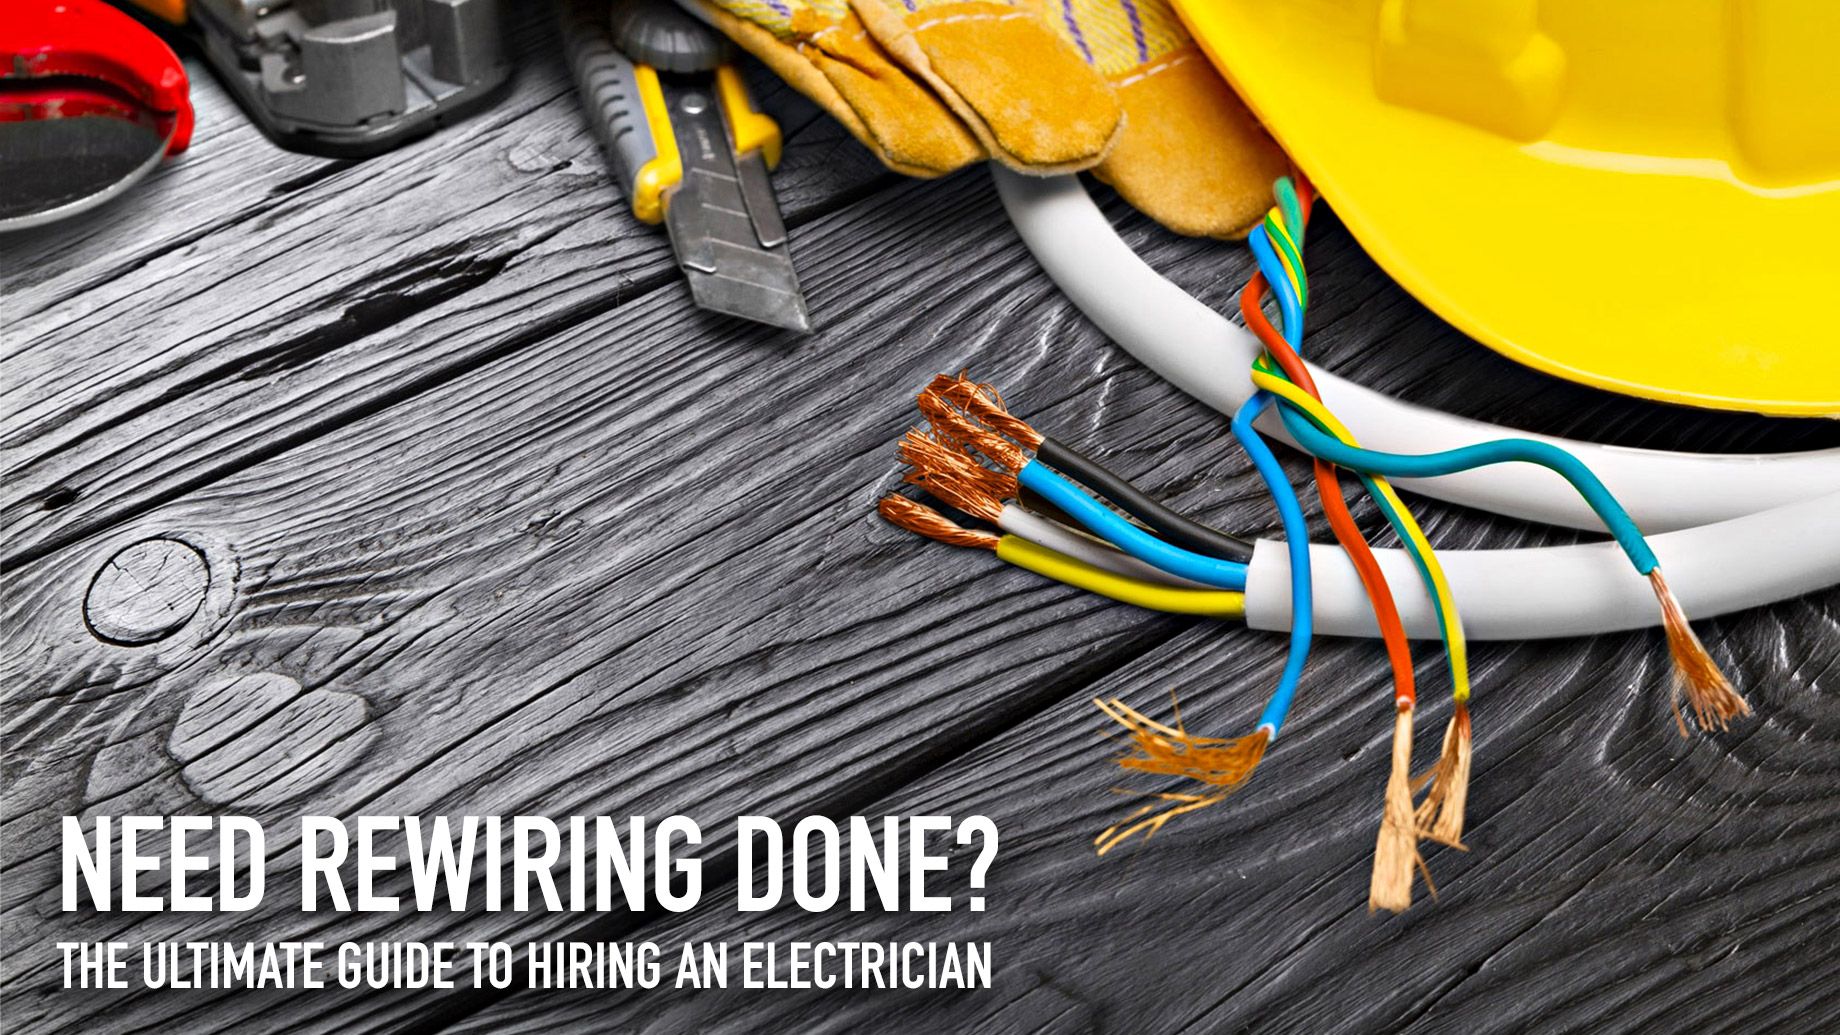 Need Rewiring Done? The Ultimate Guide to Hiring an Electrician